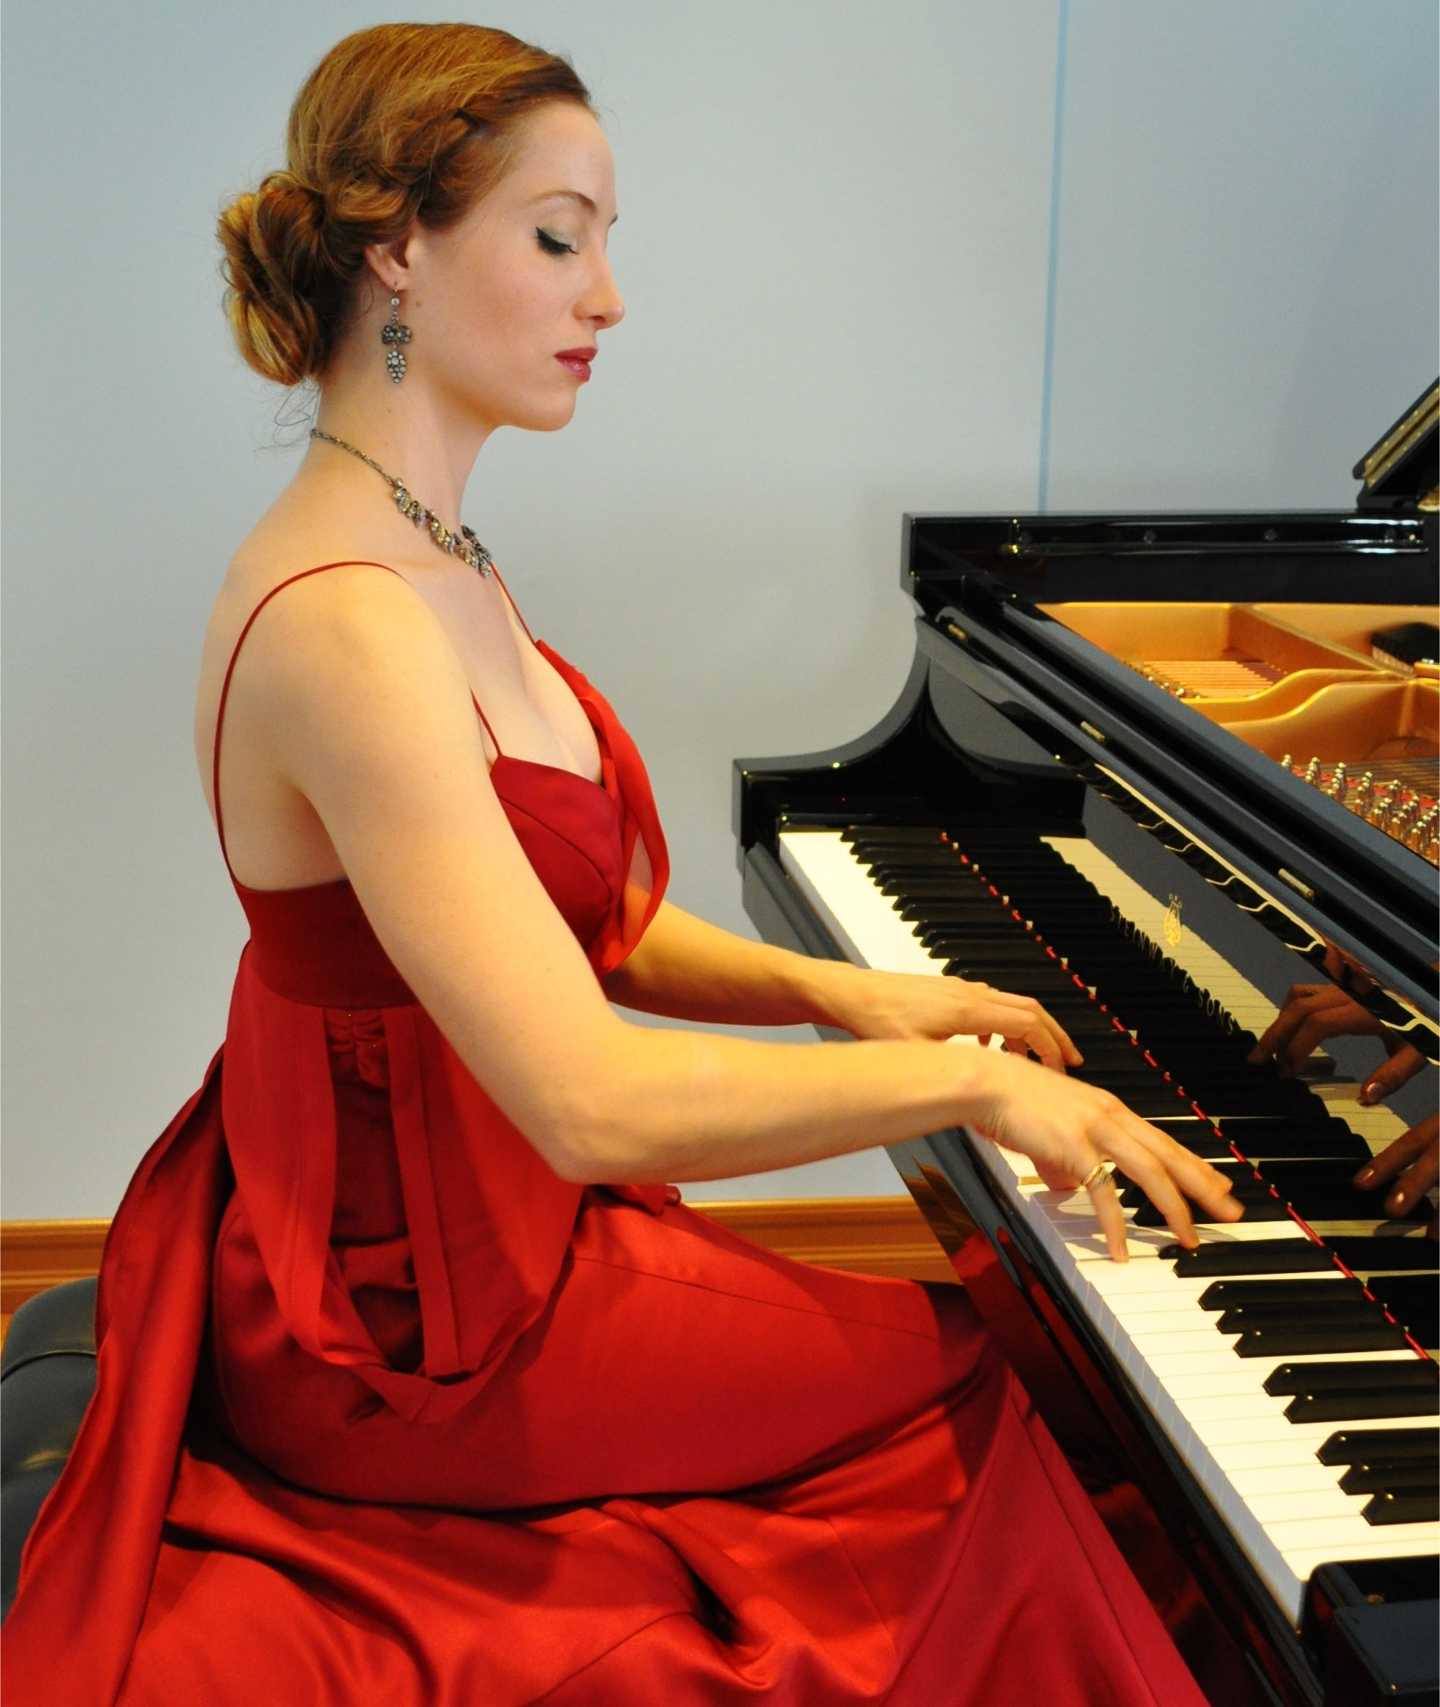 Photo of Danae Xanthe Vlasse performing in a red dress at a piano.